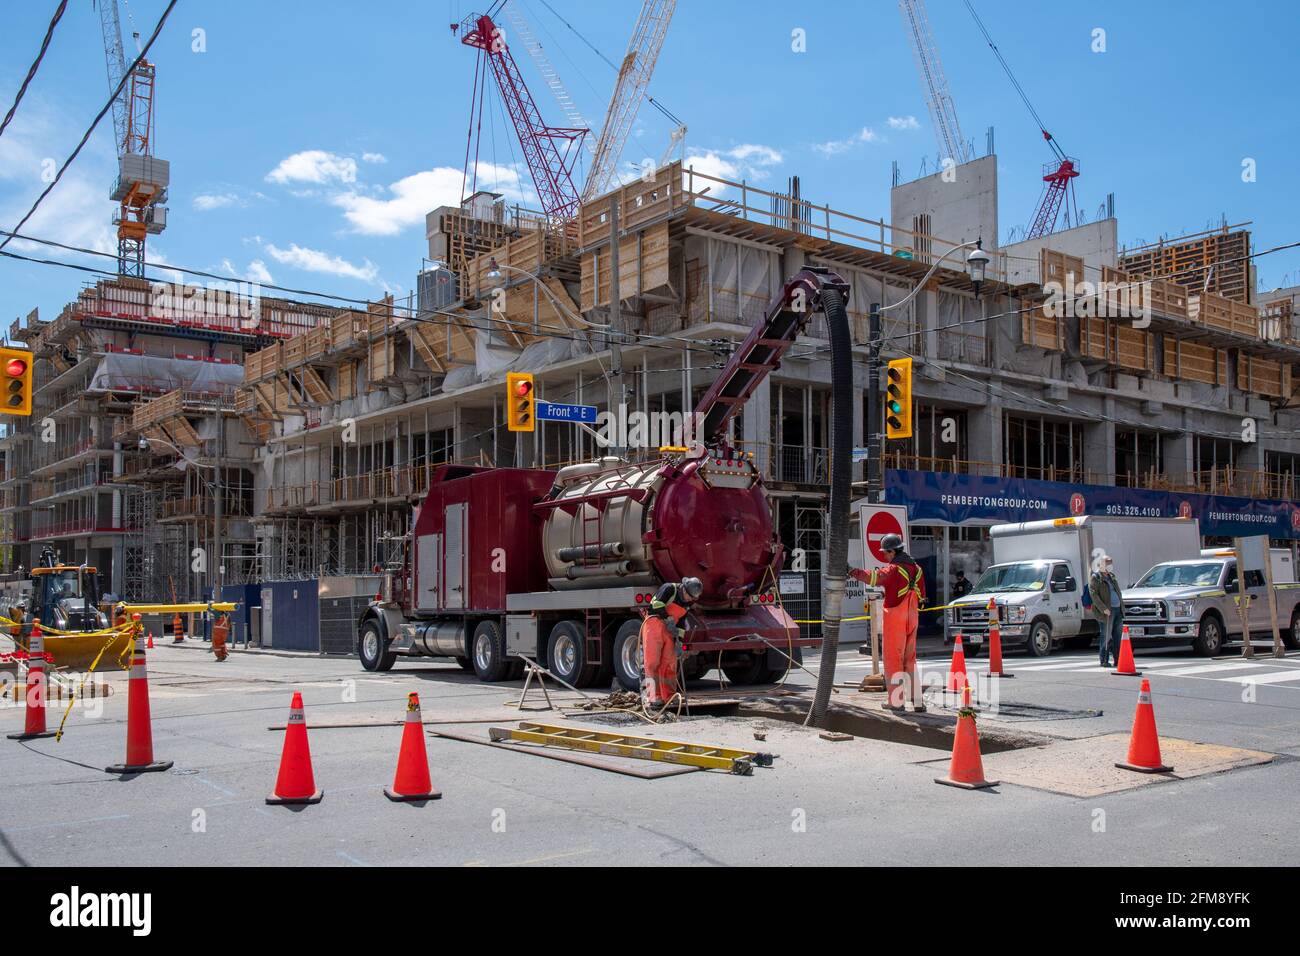 Construction site in Front Street in the Old Town of Toronto, Canada. Urban sprawl due to high demand for real estate. Stock Photo